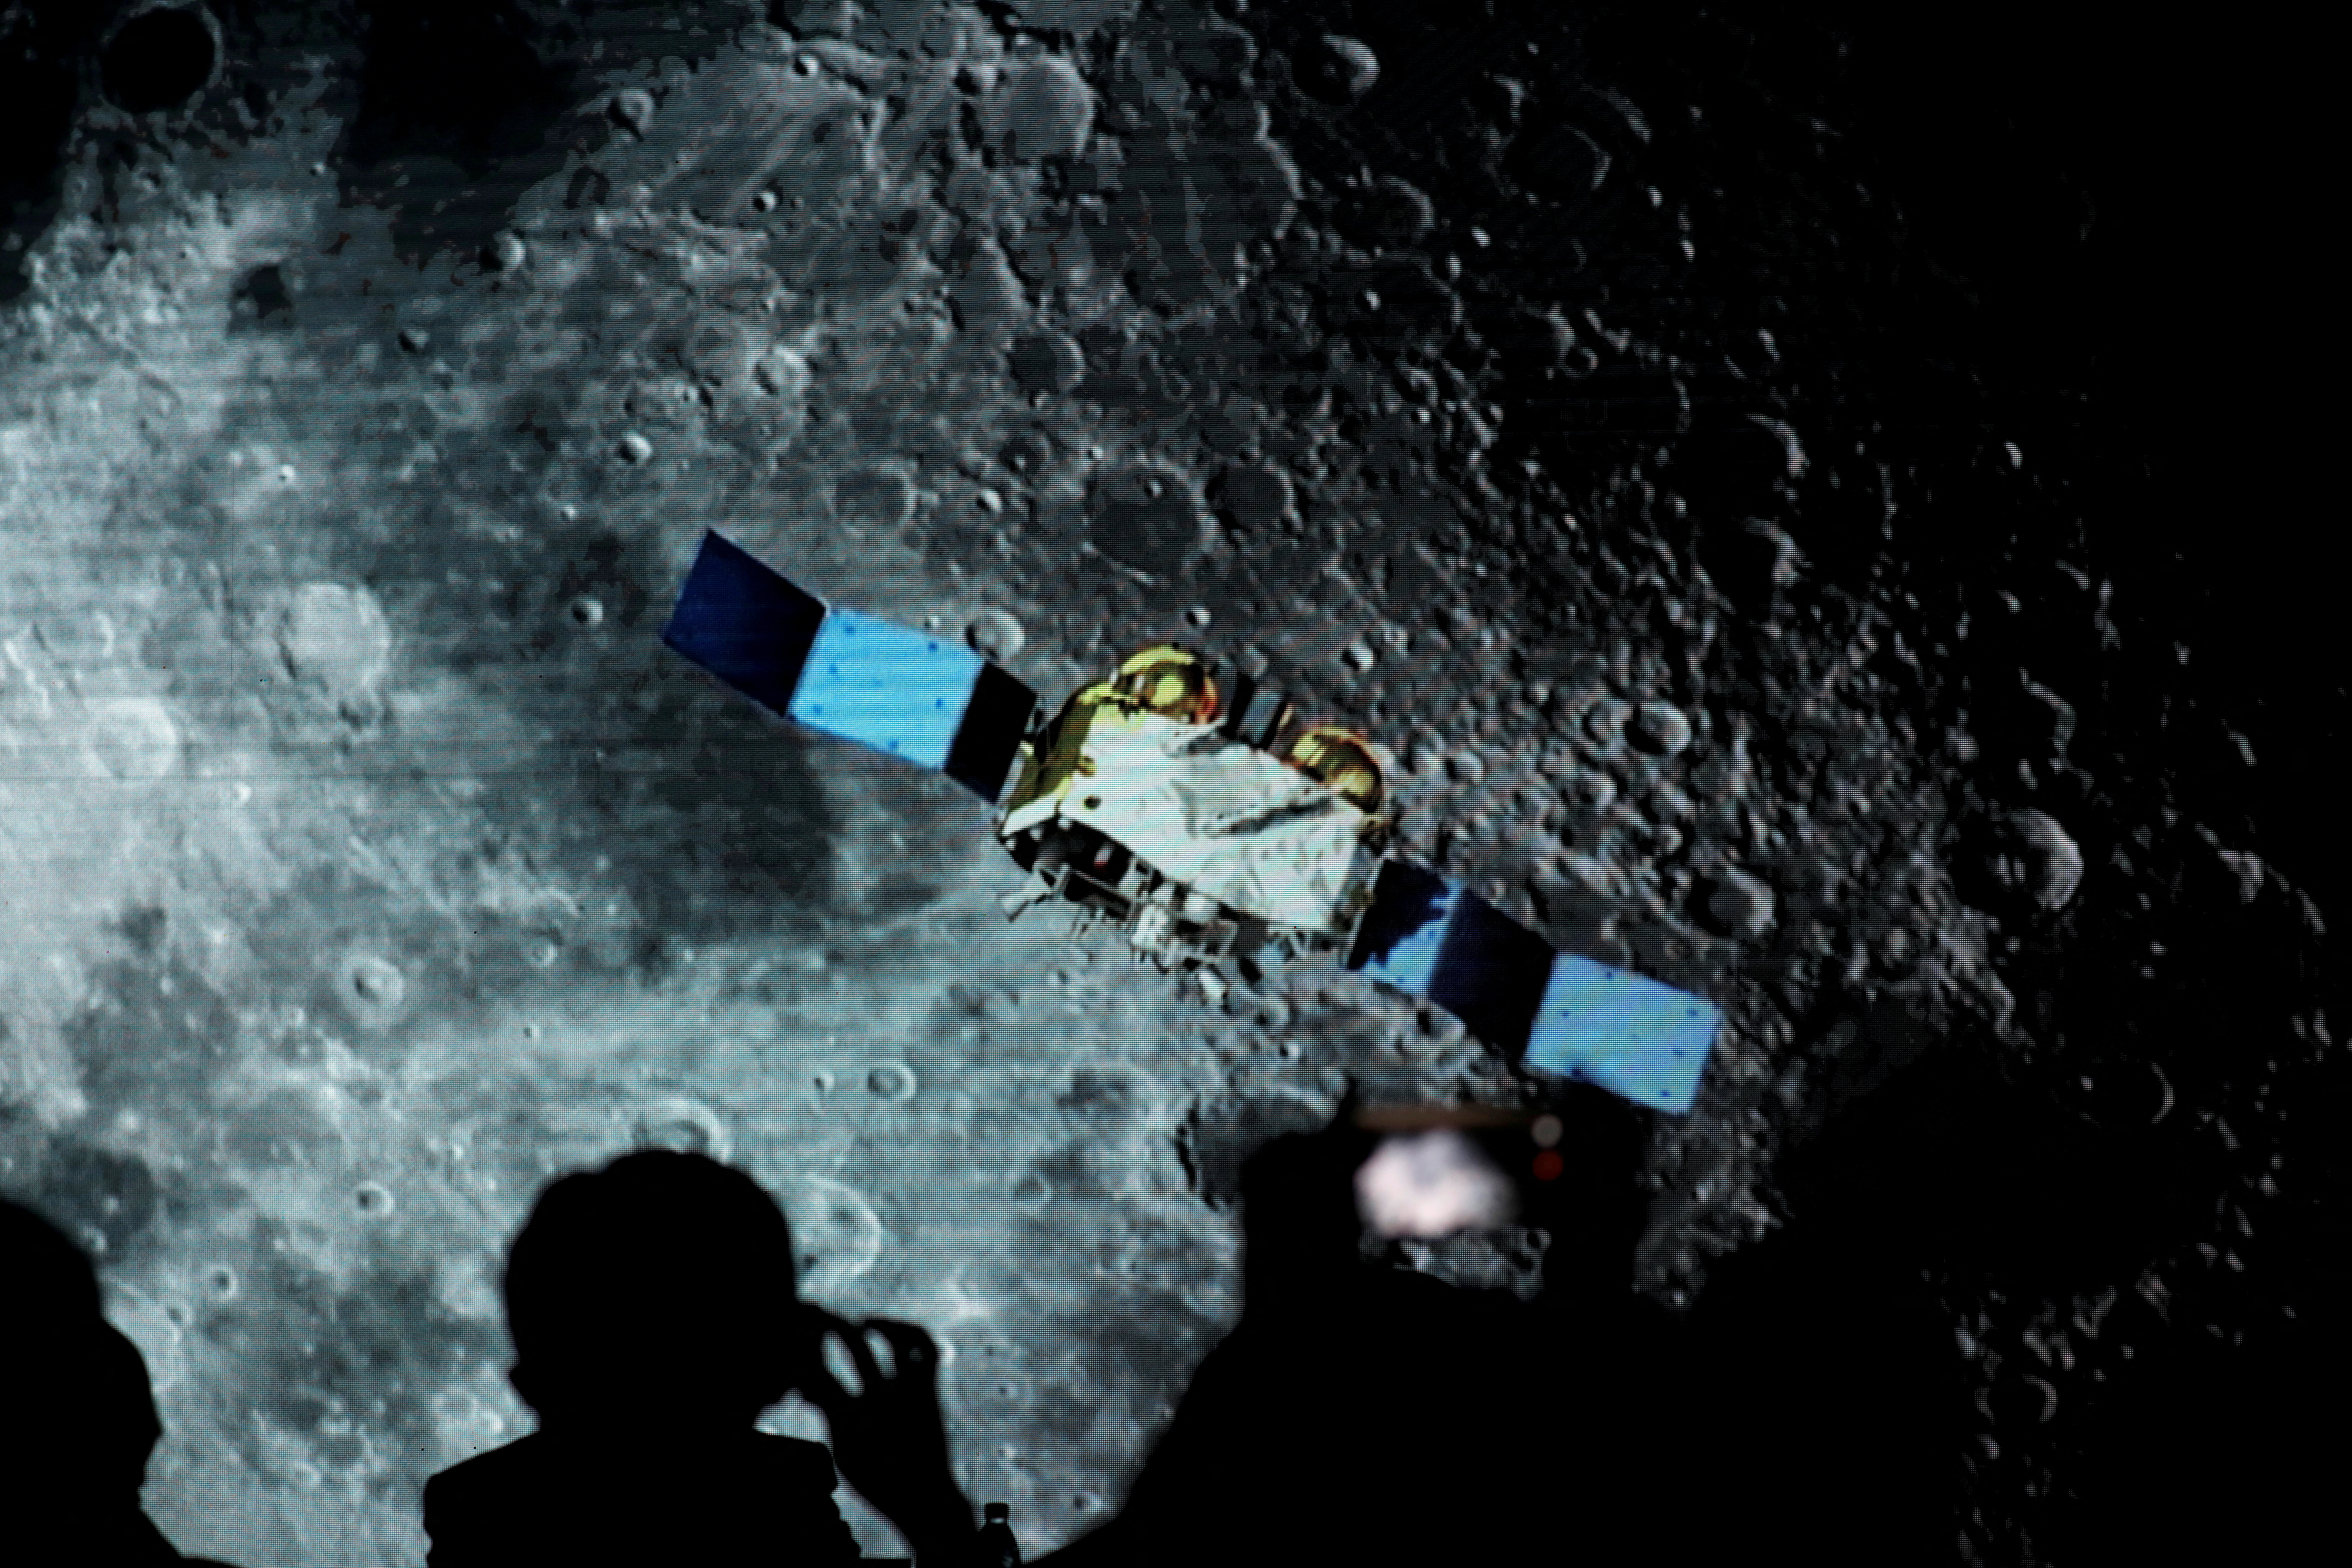 FILE PHOTO: Screen shows footages of spacecraft for Chang'e-5 Mission, during an event on China’s lunar exploration program, at the National Astronomical Observatories of Chinese Academy of Sciences, in Beijing